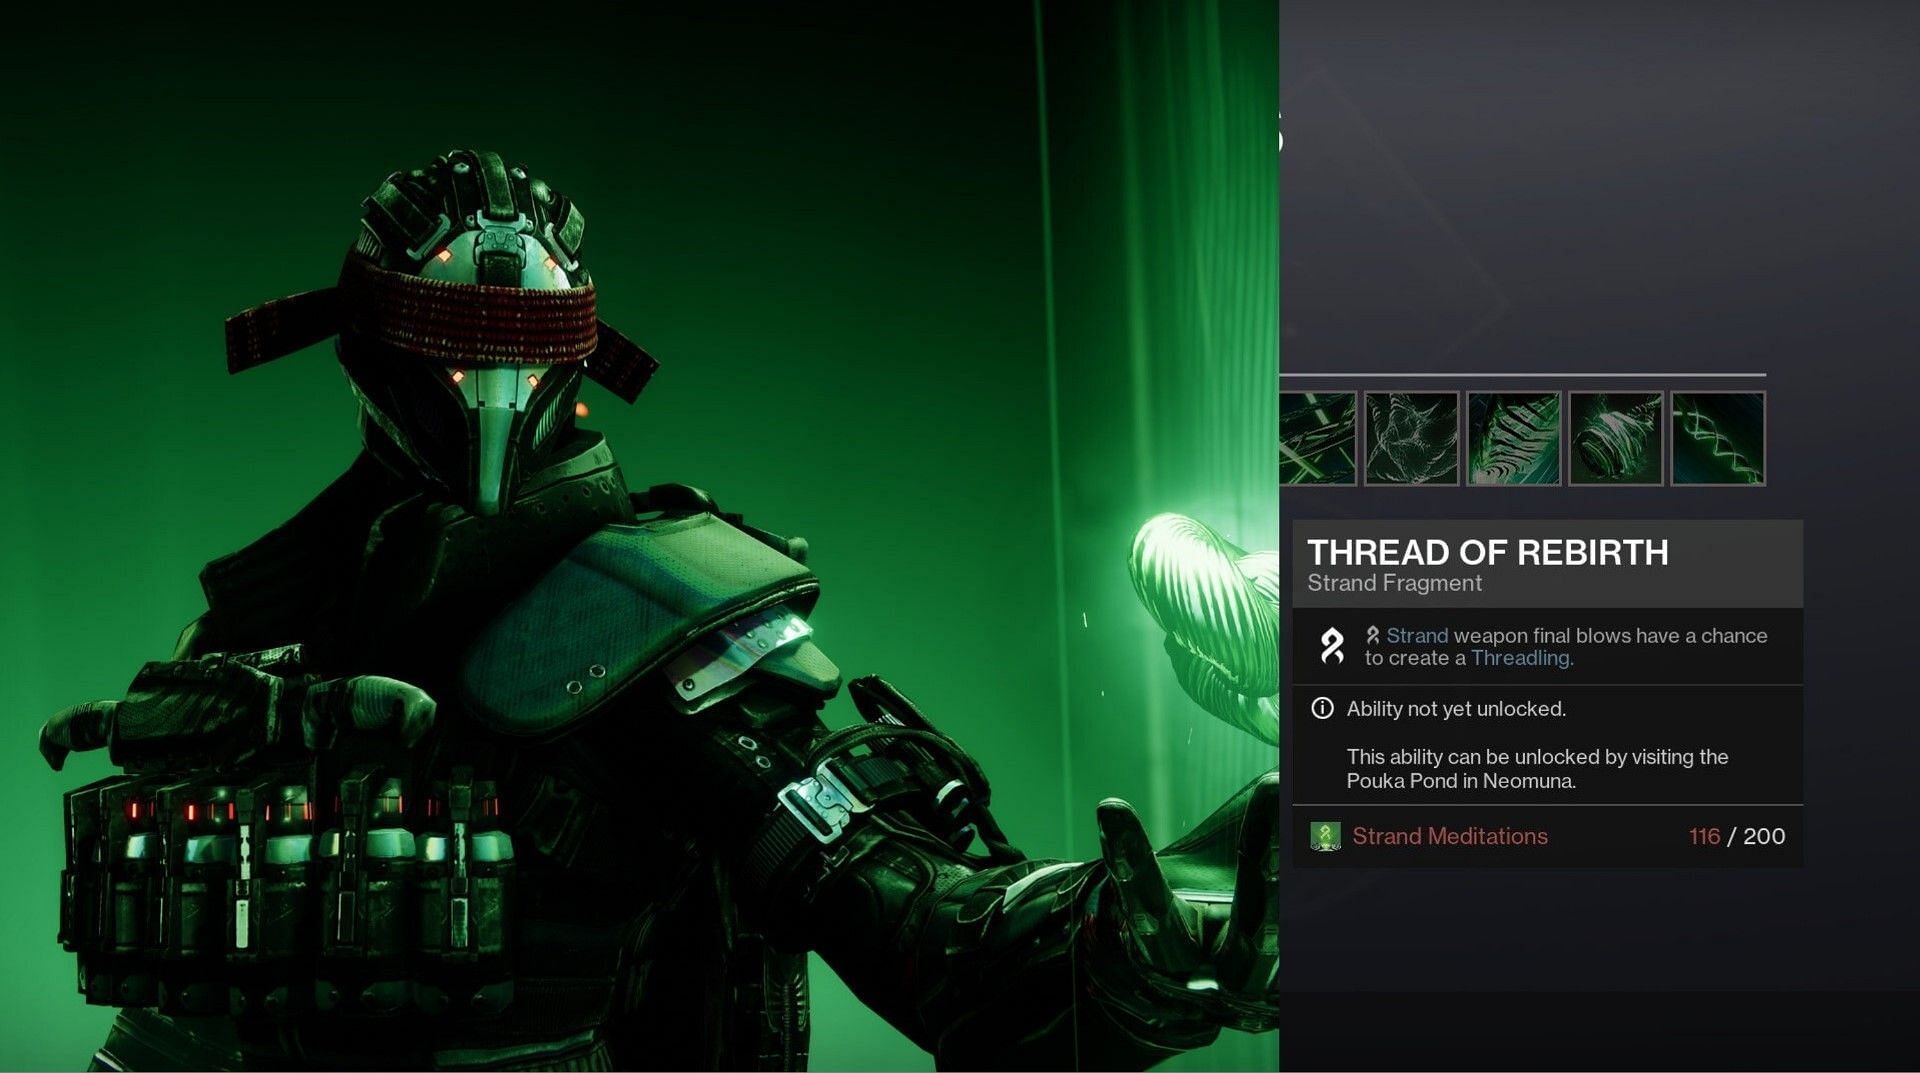 Destiny 2 Warlock on the left and description of Thread of Rebirth on the right.